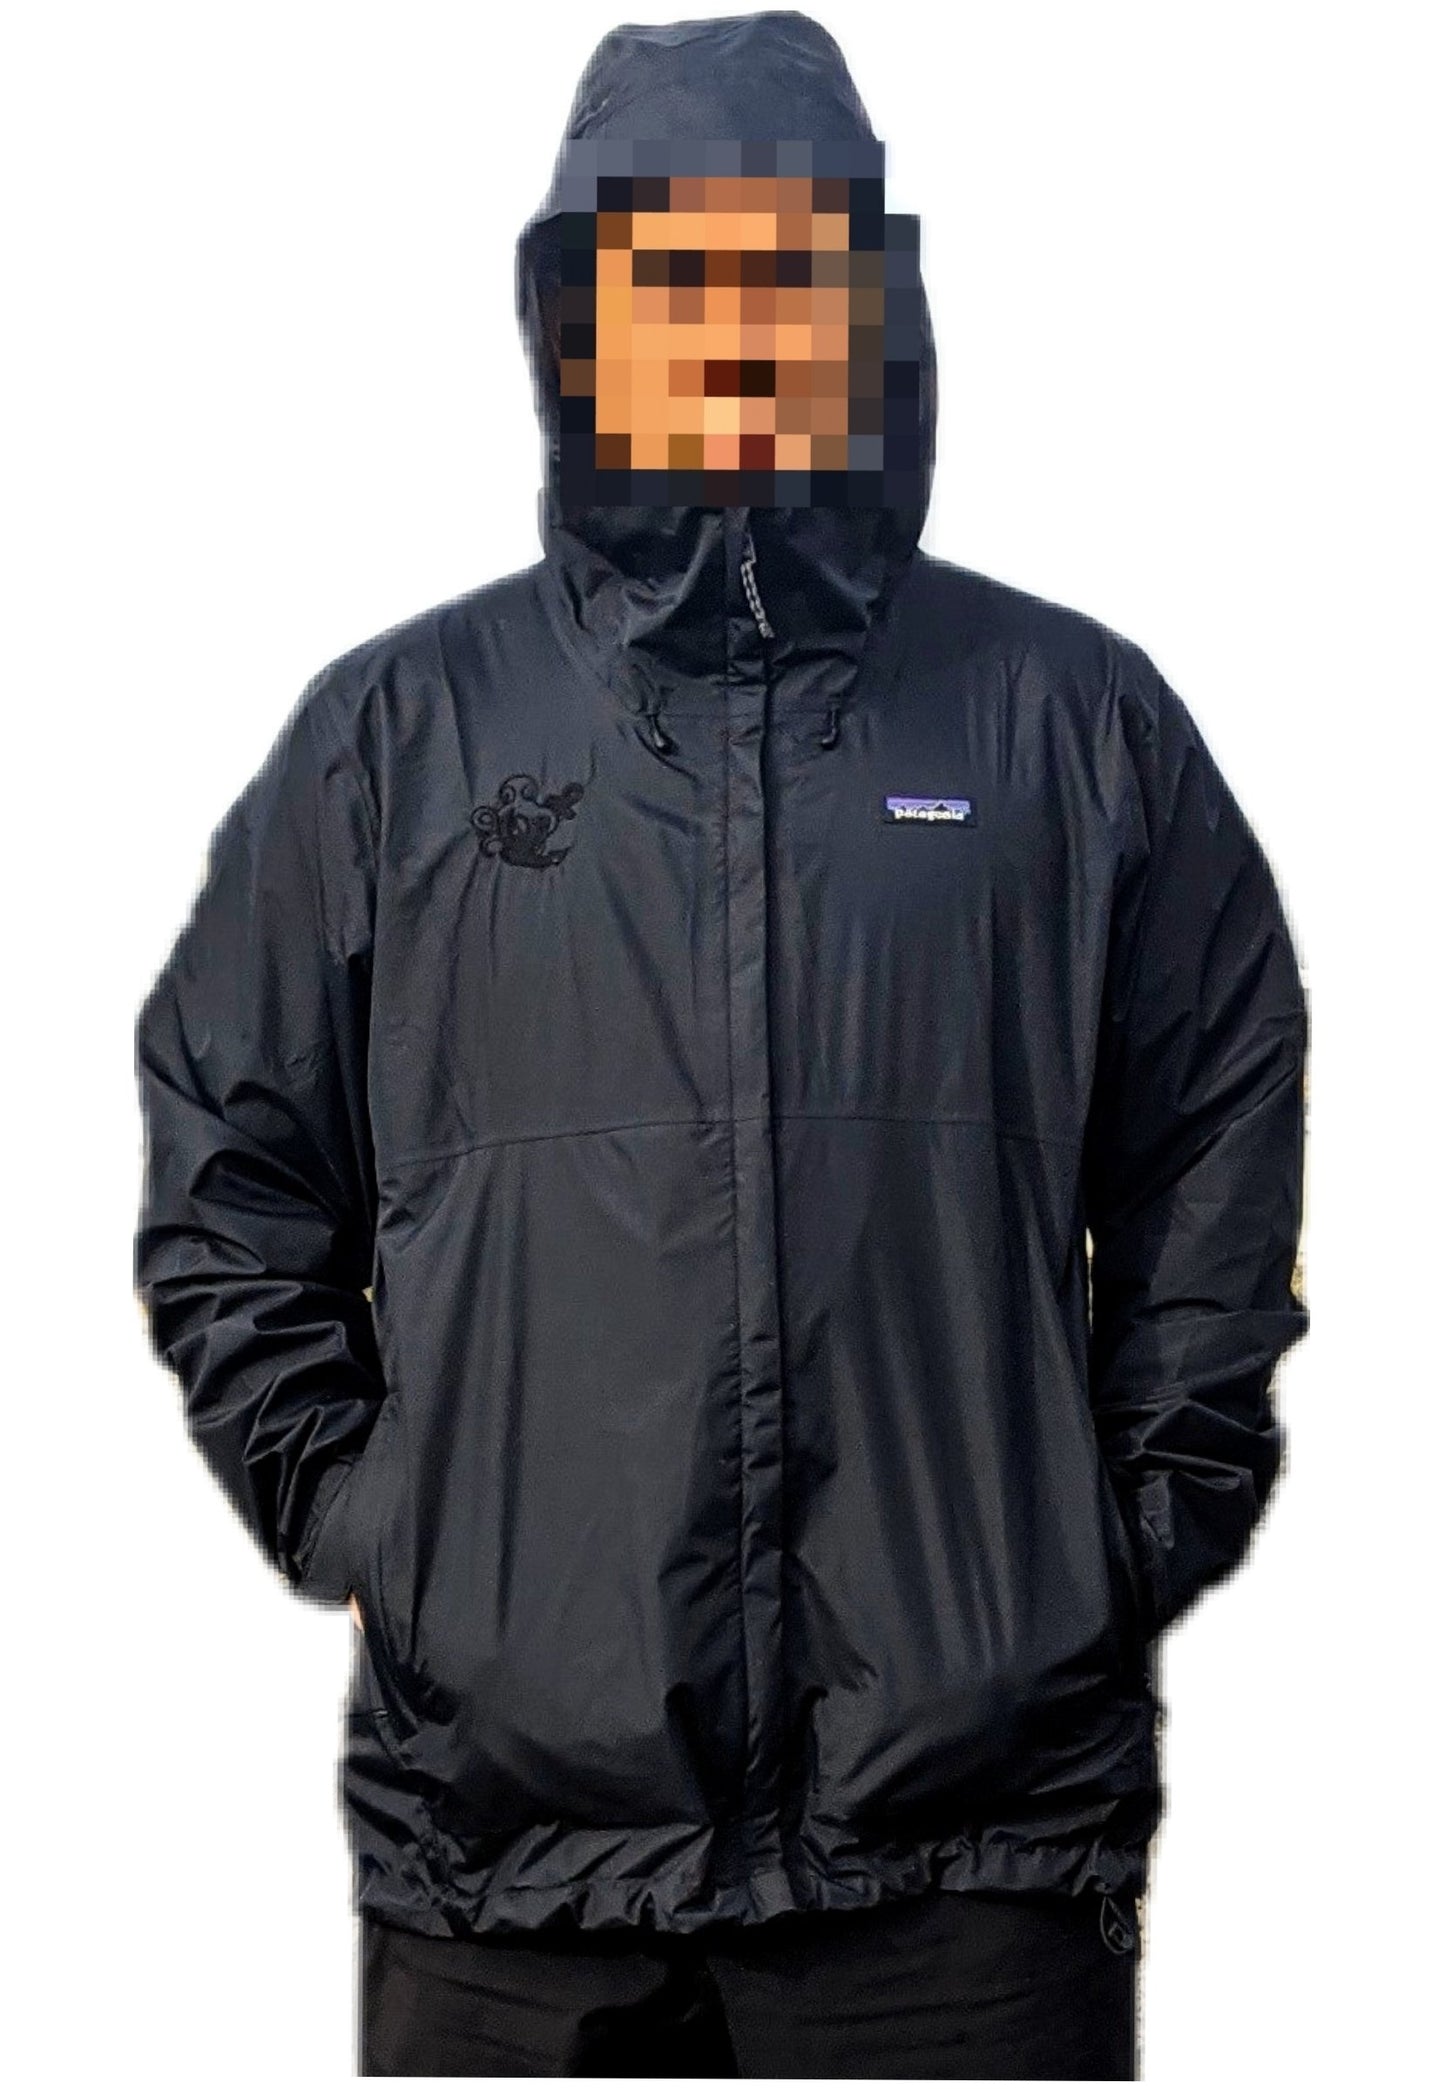 Foul Weather Jacket - The Chits Inn